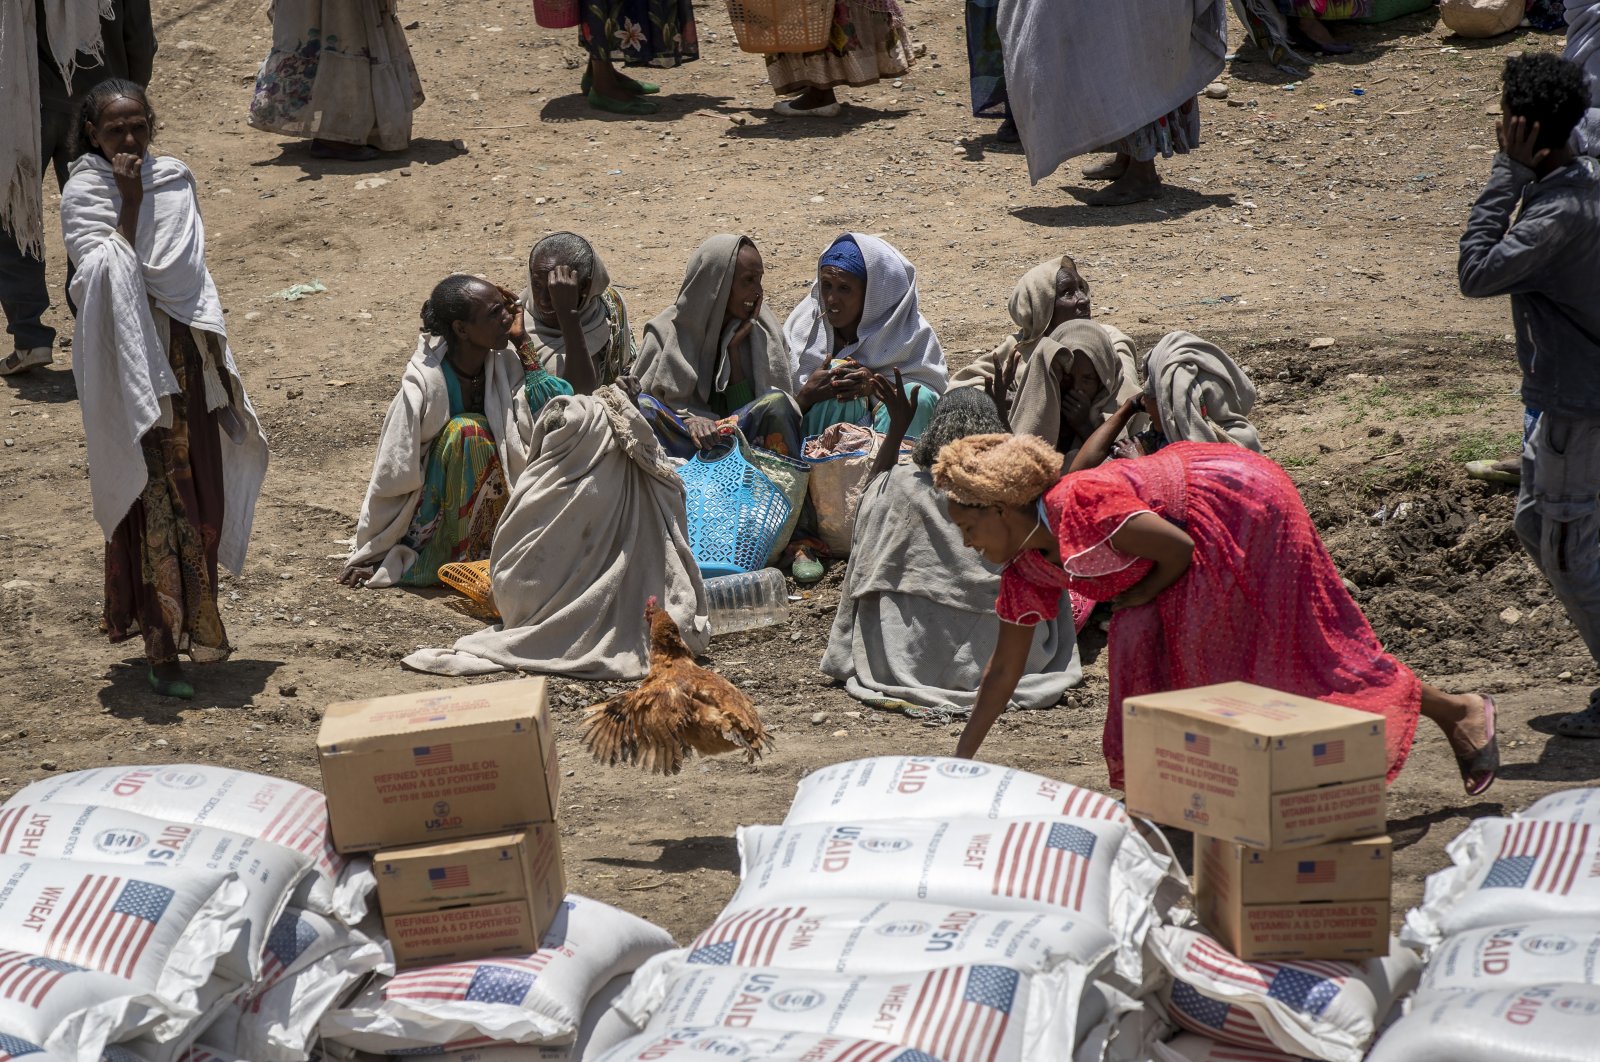 A woman chases a chicken as others sit and wait to receive food supplies such as wheat, yellow split peas and vegetable oil at a food distribution operated by the Relief Society of Tigray in the town of Agula, in the Tigray region of northern Ethiopia, May 8, 2021. (AP Photo)